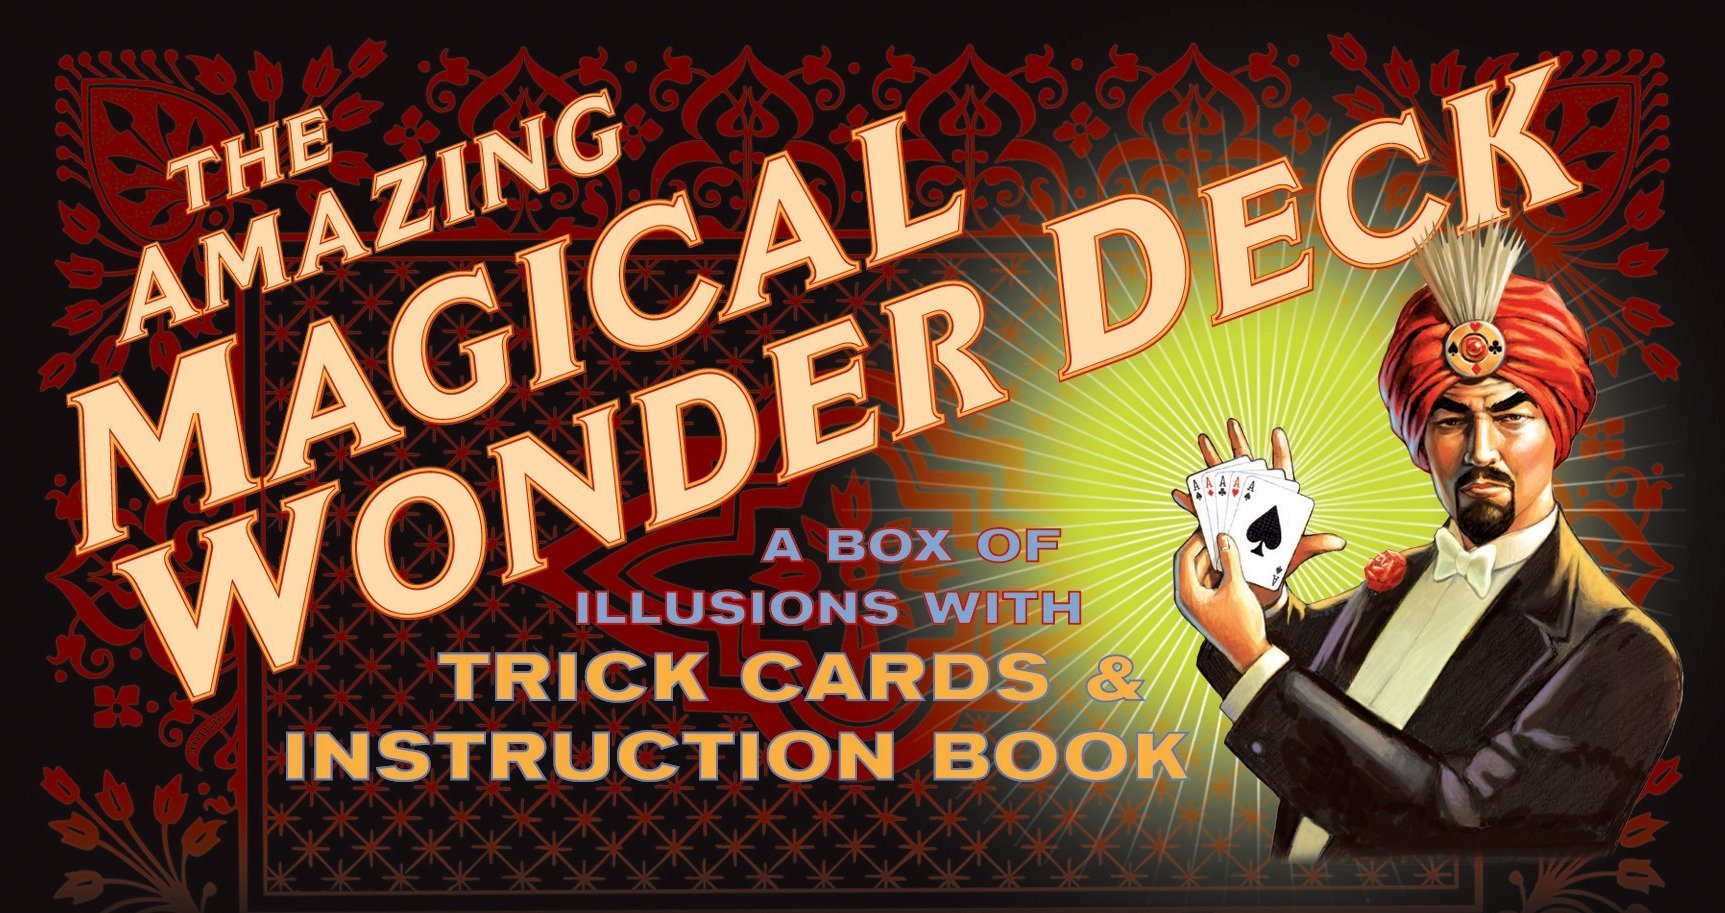 The Amazing Magical Wonder Deck: A Box of Illusions With Trick Cards & Instruction Book